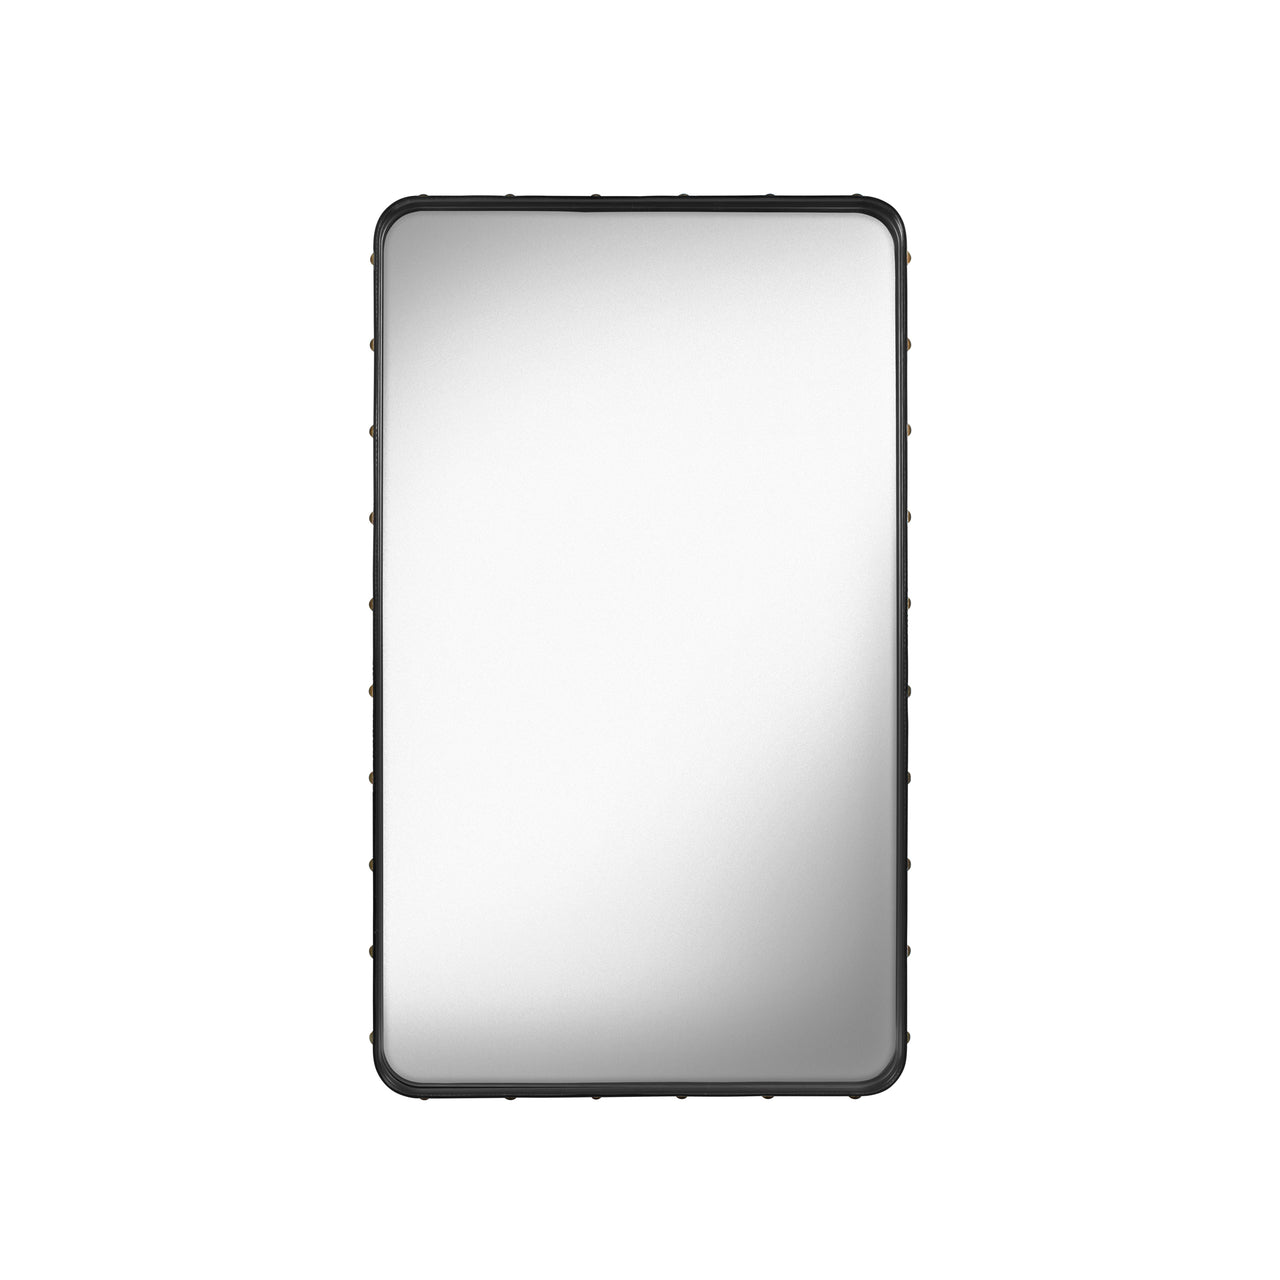 Adnet Rectangulaire Wall Mirror: Small- 45.3